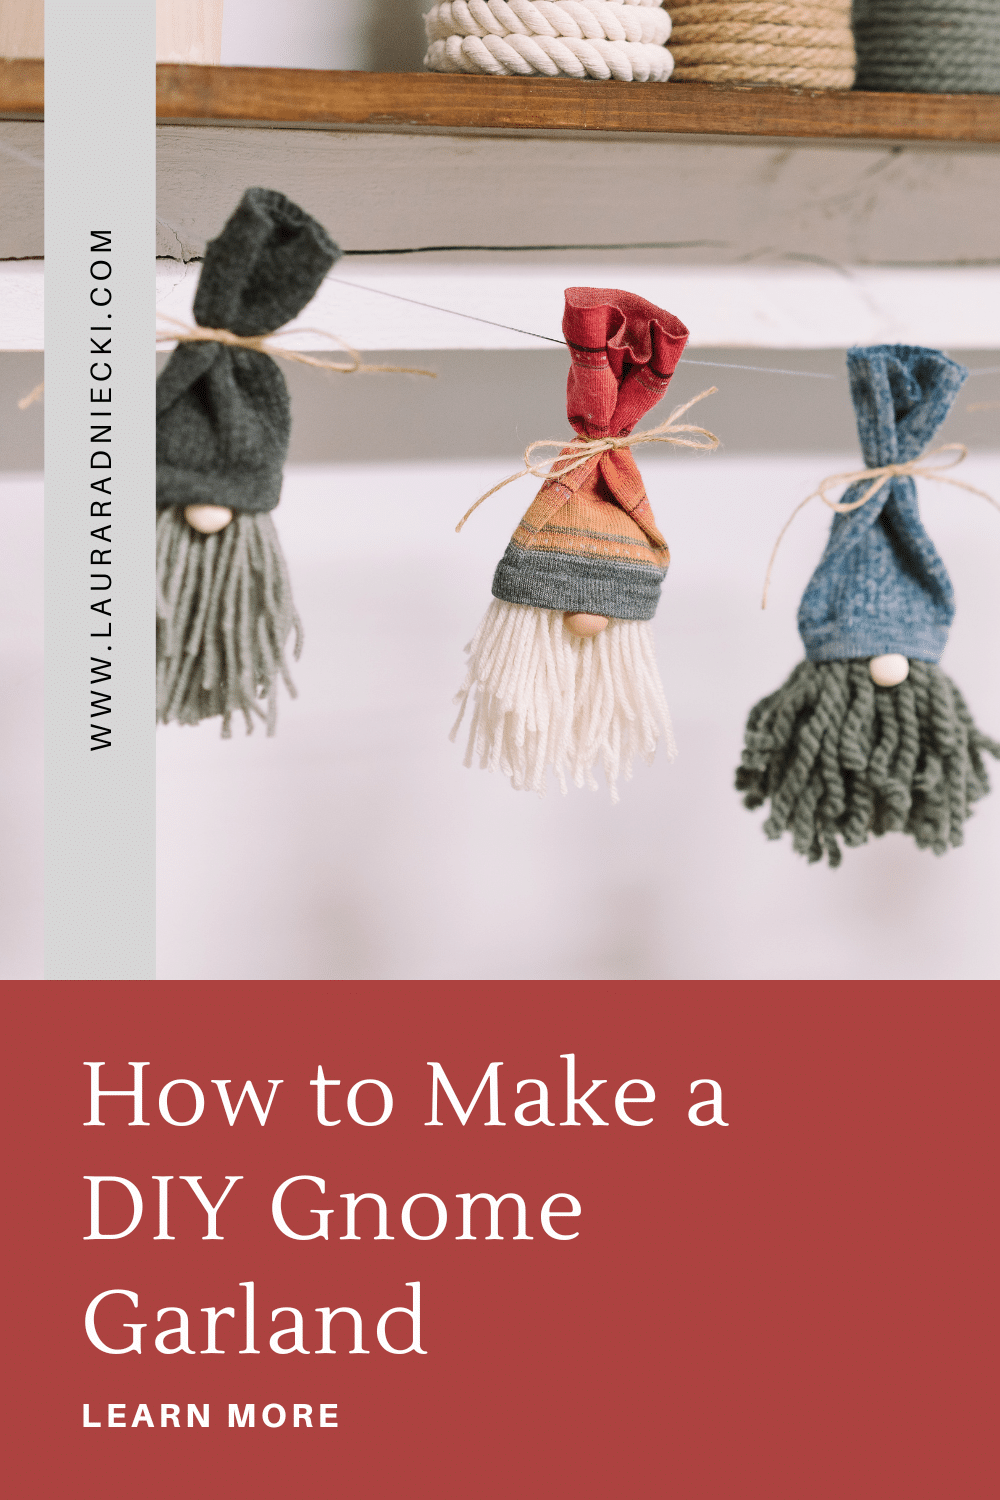 How to Make a DIY Gnome Garland with Yarn and Sock Gnomes for Christmas